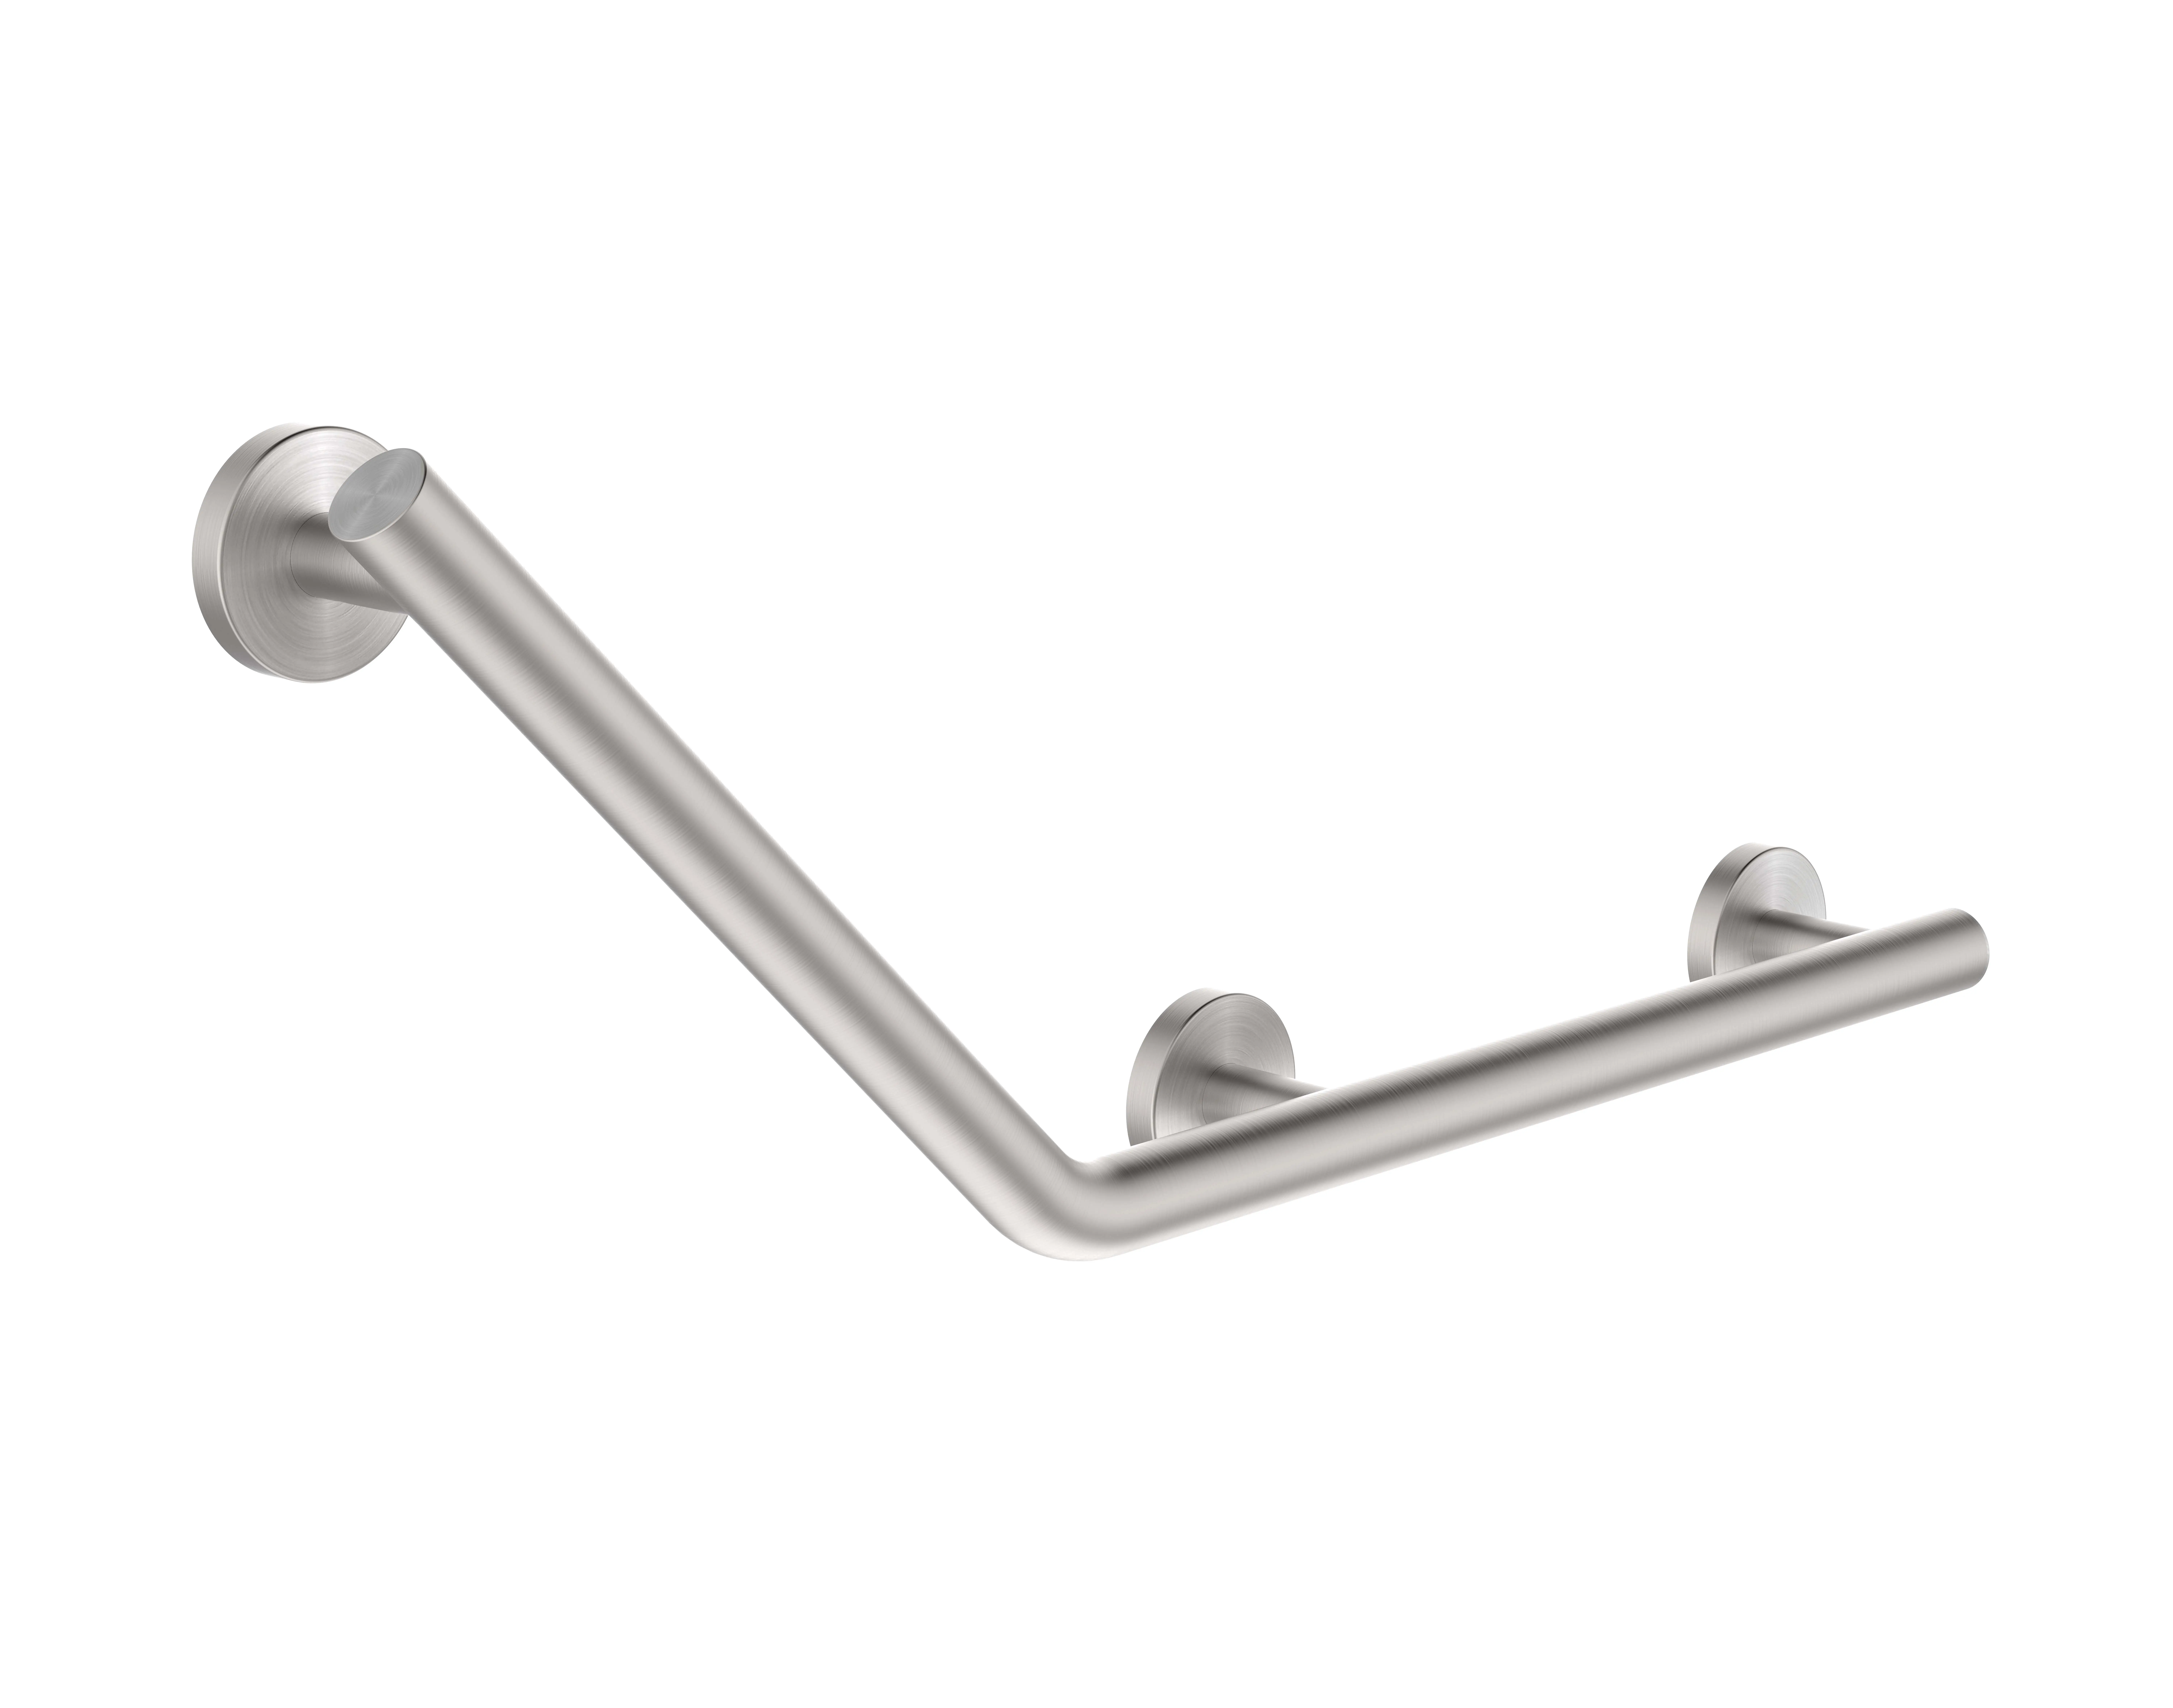 Stainless steel brush polished bathtub grab bar 60cm for left side with Fischer screw & plug